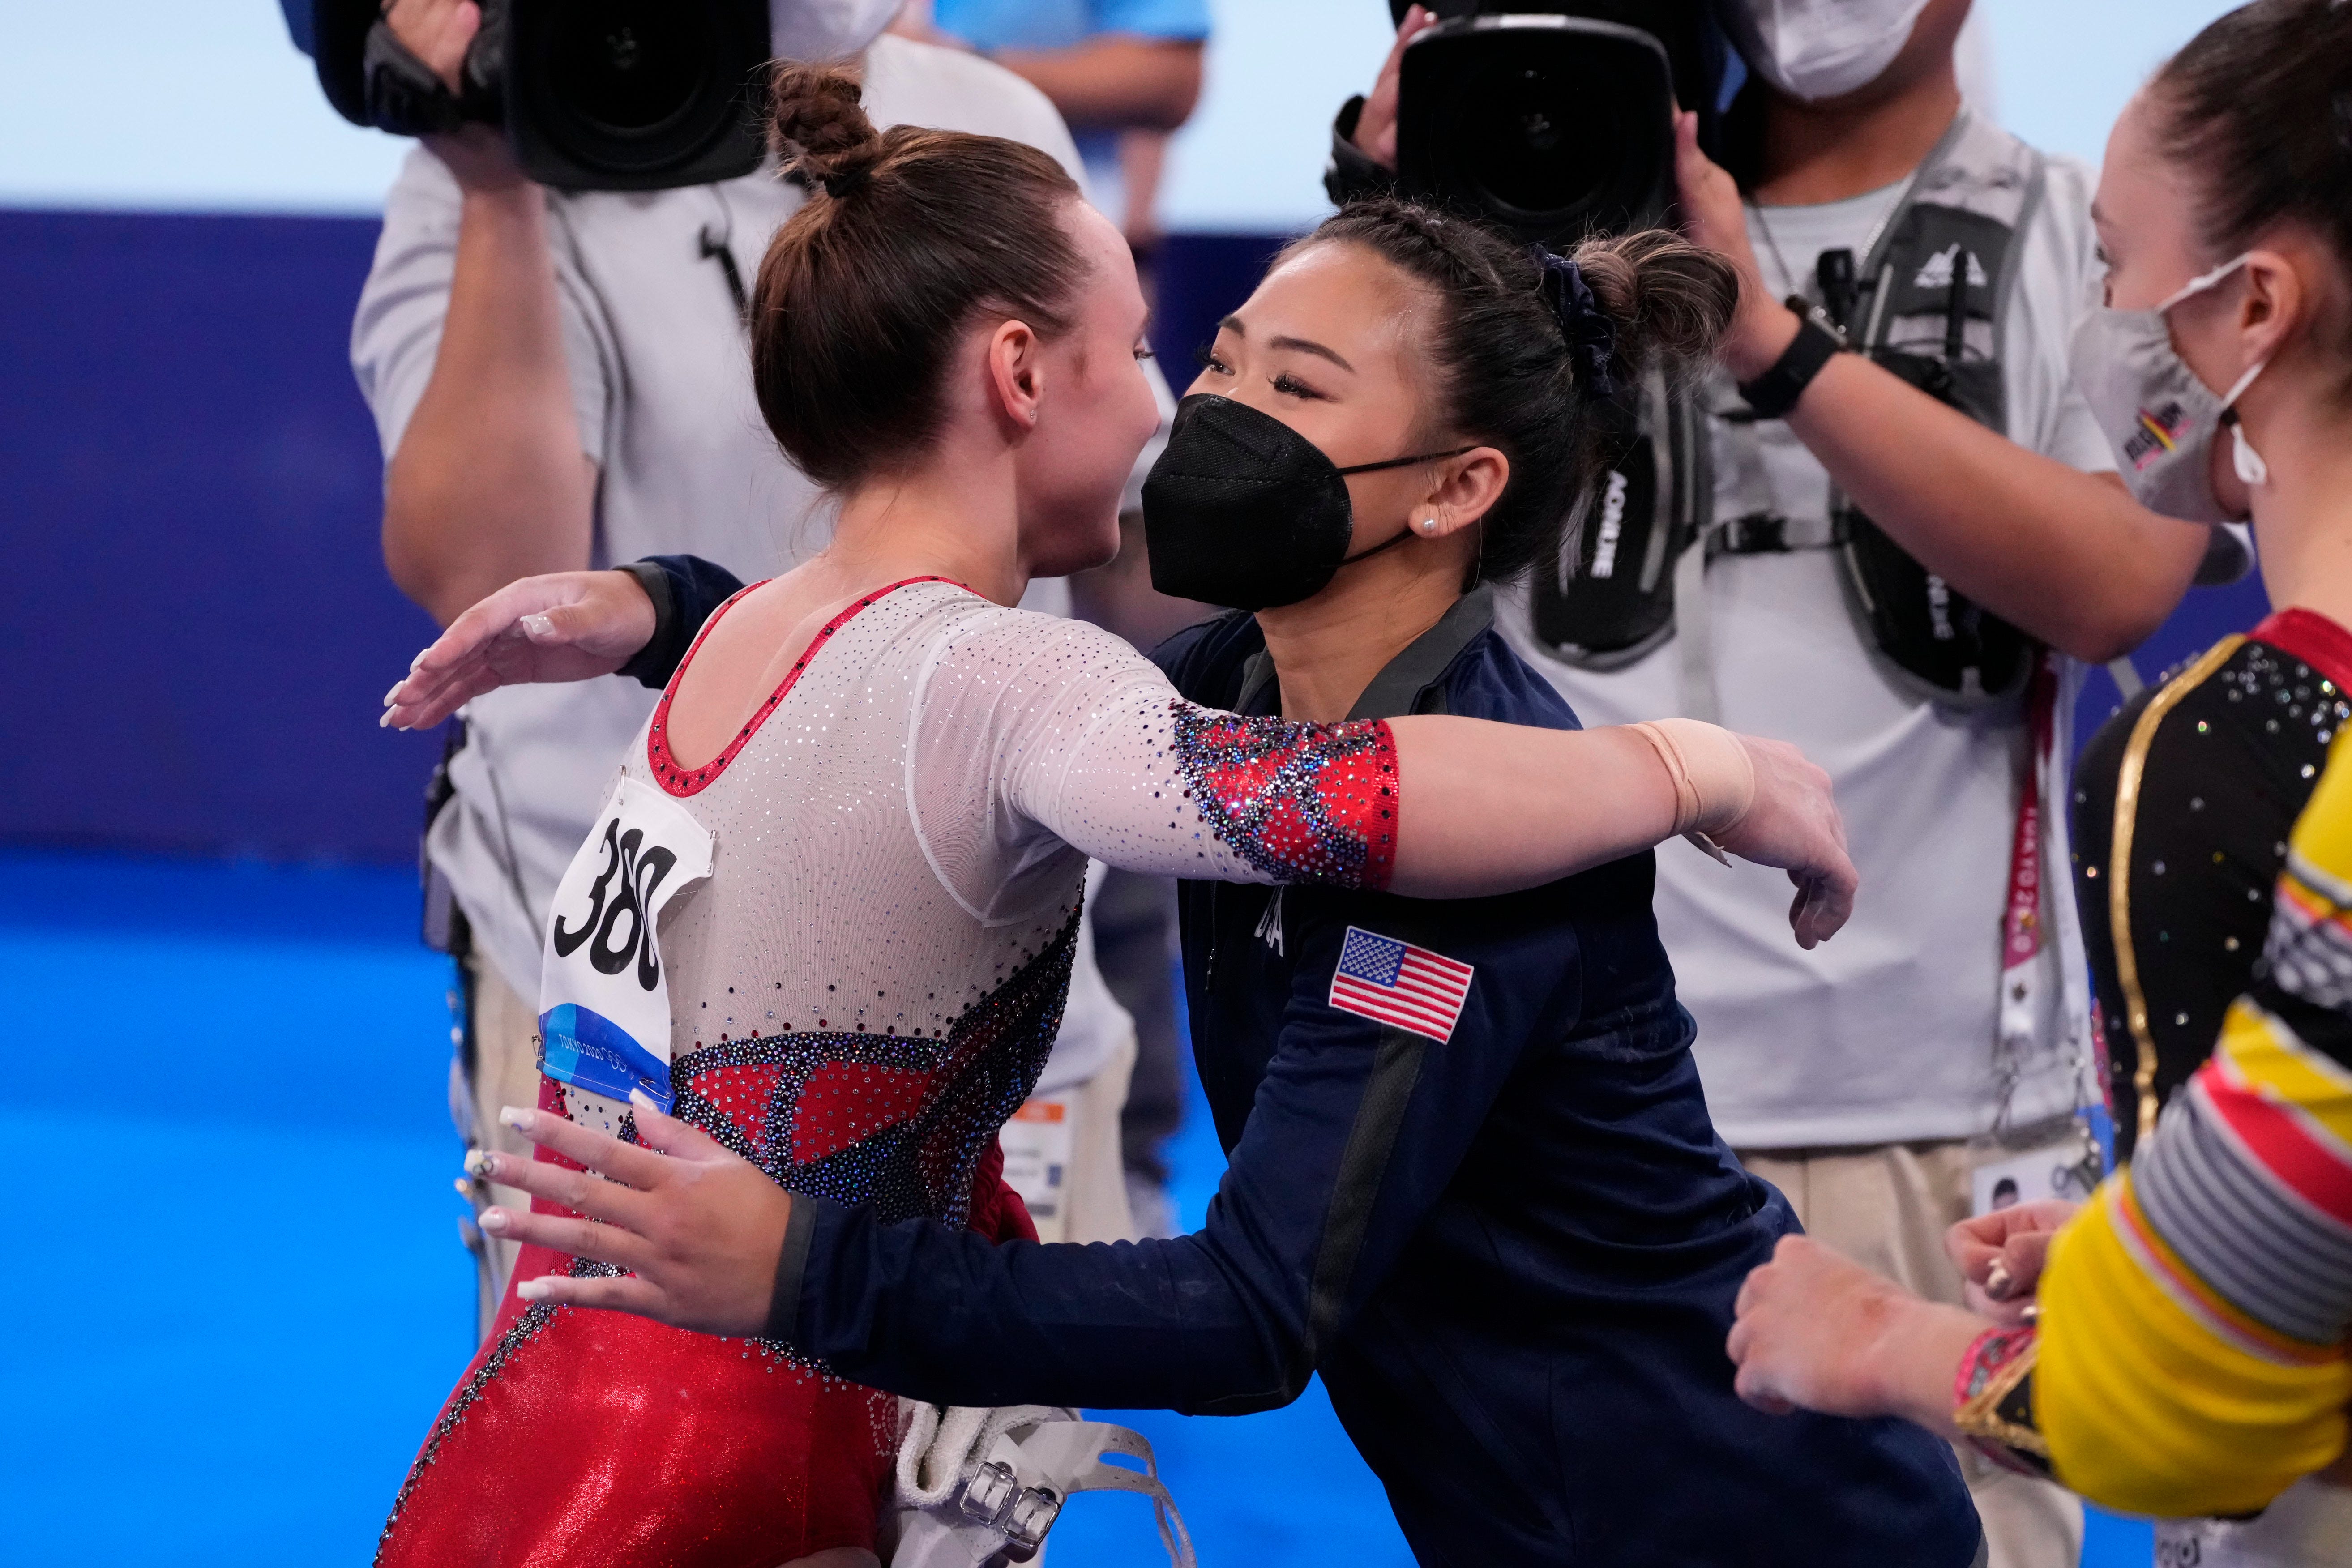 Opinion: Not allowing warm-ups 'obviously so dangerous' for gymnasts